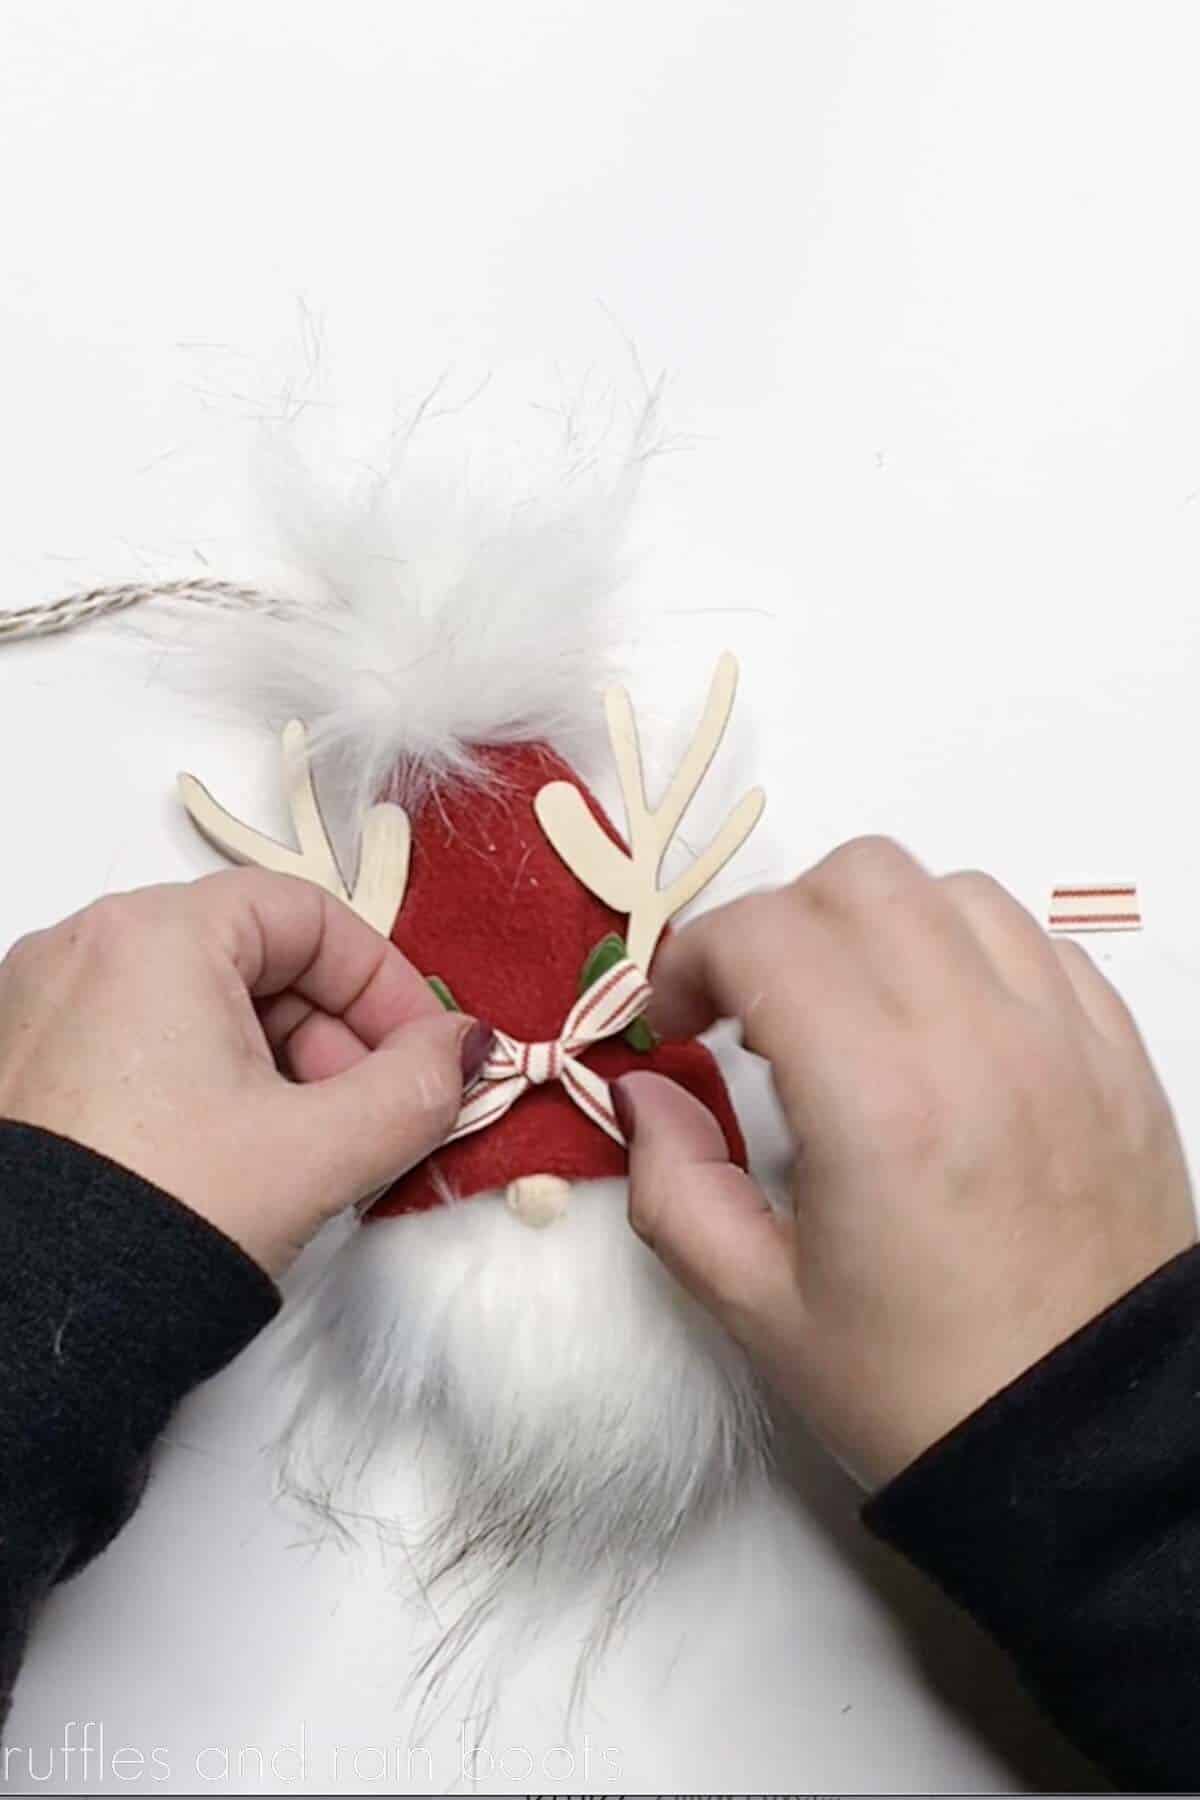 Crafter gluing on greenery and a bow to a finished gnome ornament with reindeer antlers.